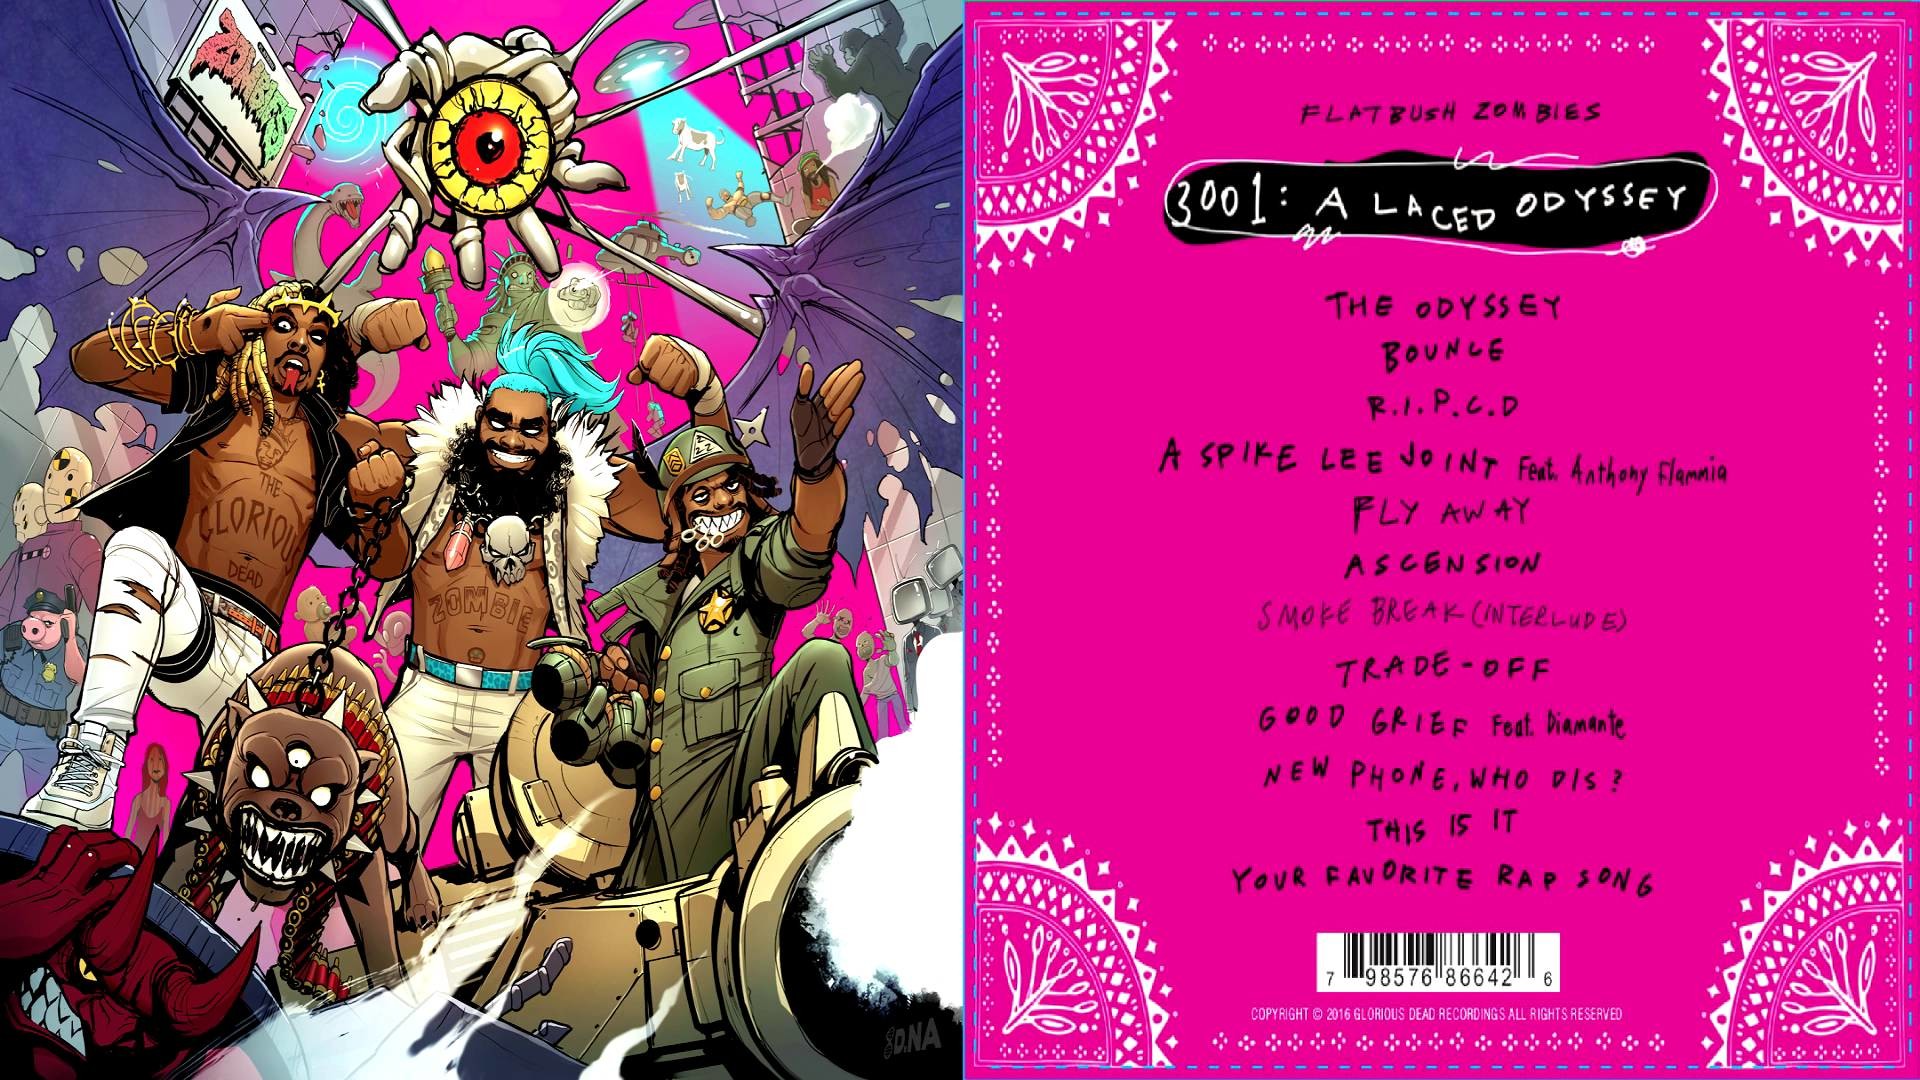 Flatbush ZOMBiES – The Odyssey 3001 A Laced Odyssey DOWNLOAD / BUY